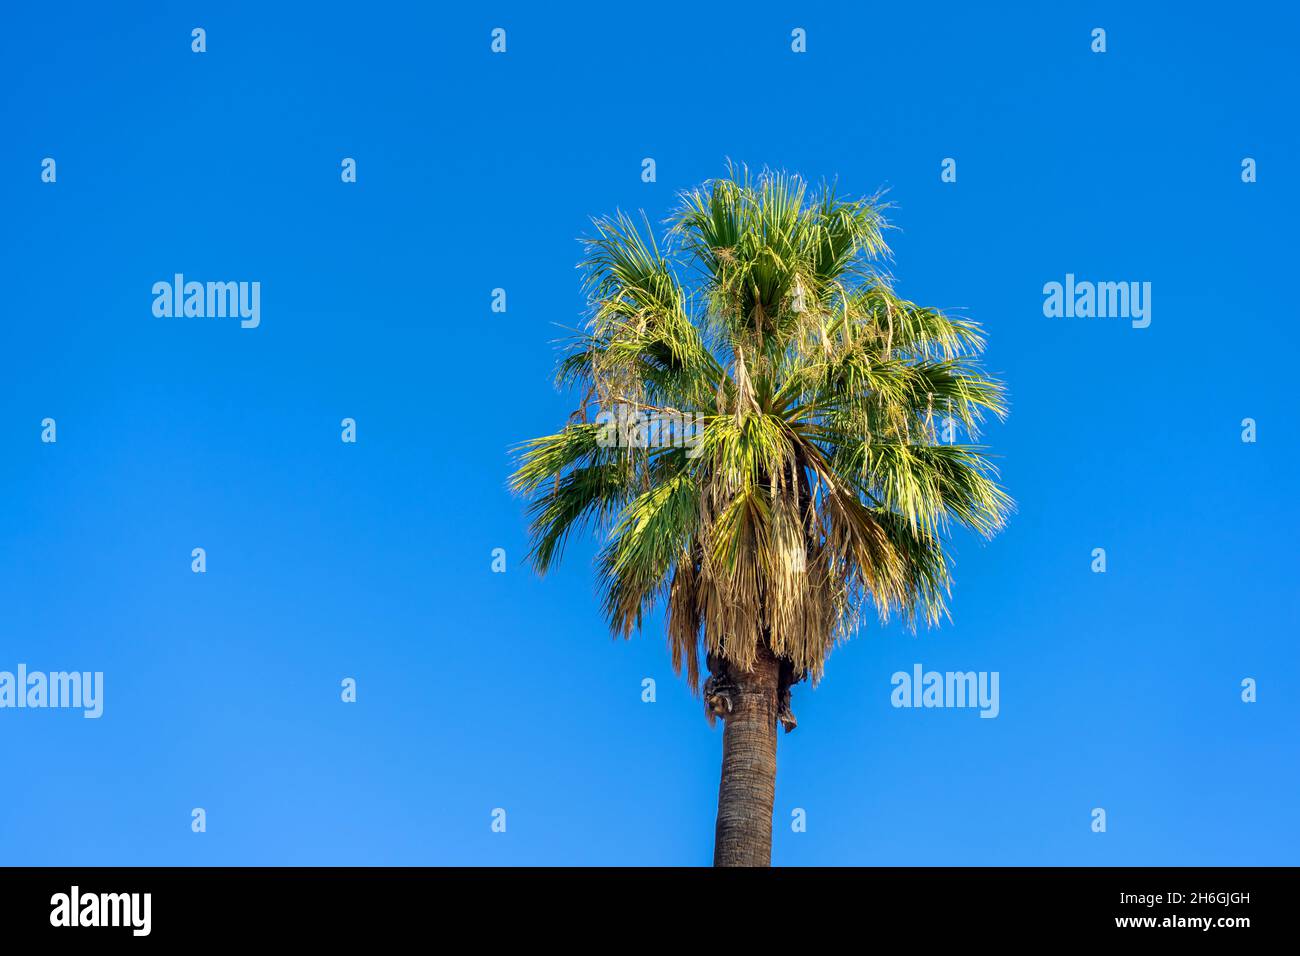 California Fan Palm Tree with clear blue sky Stock Photo